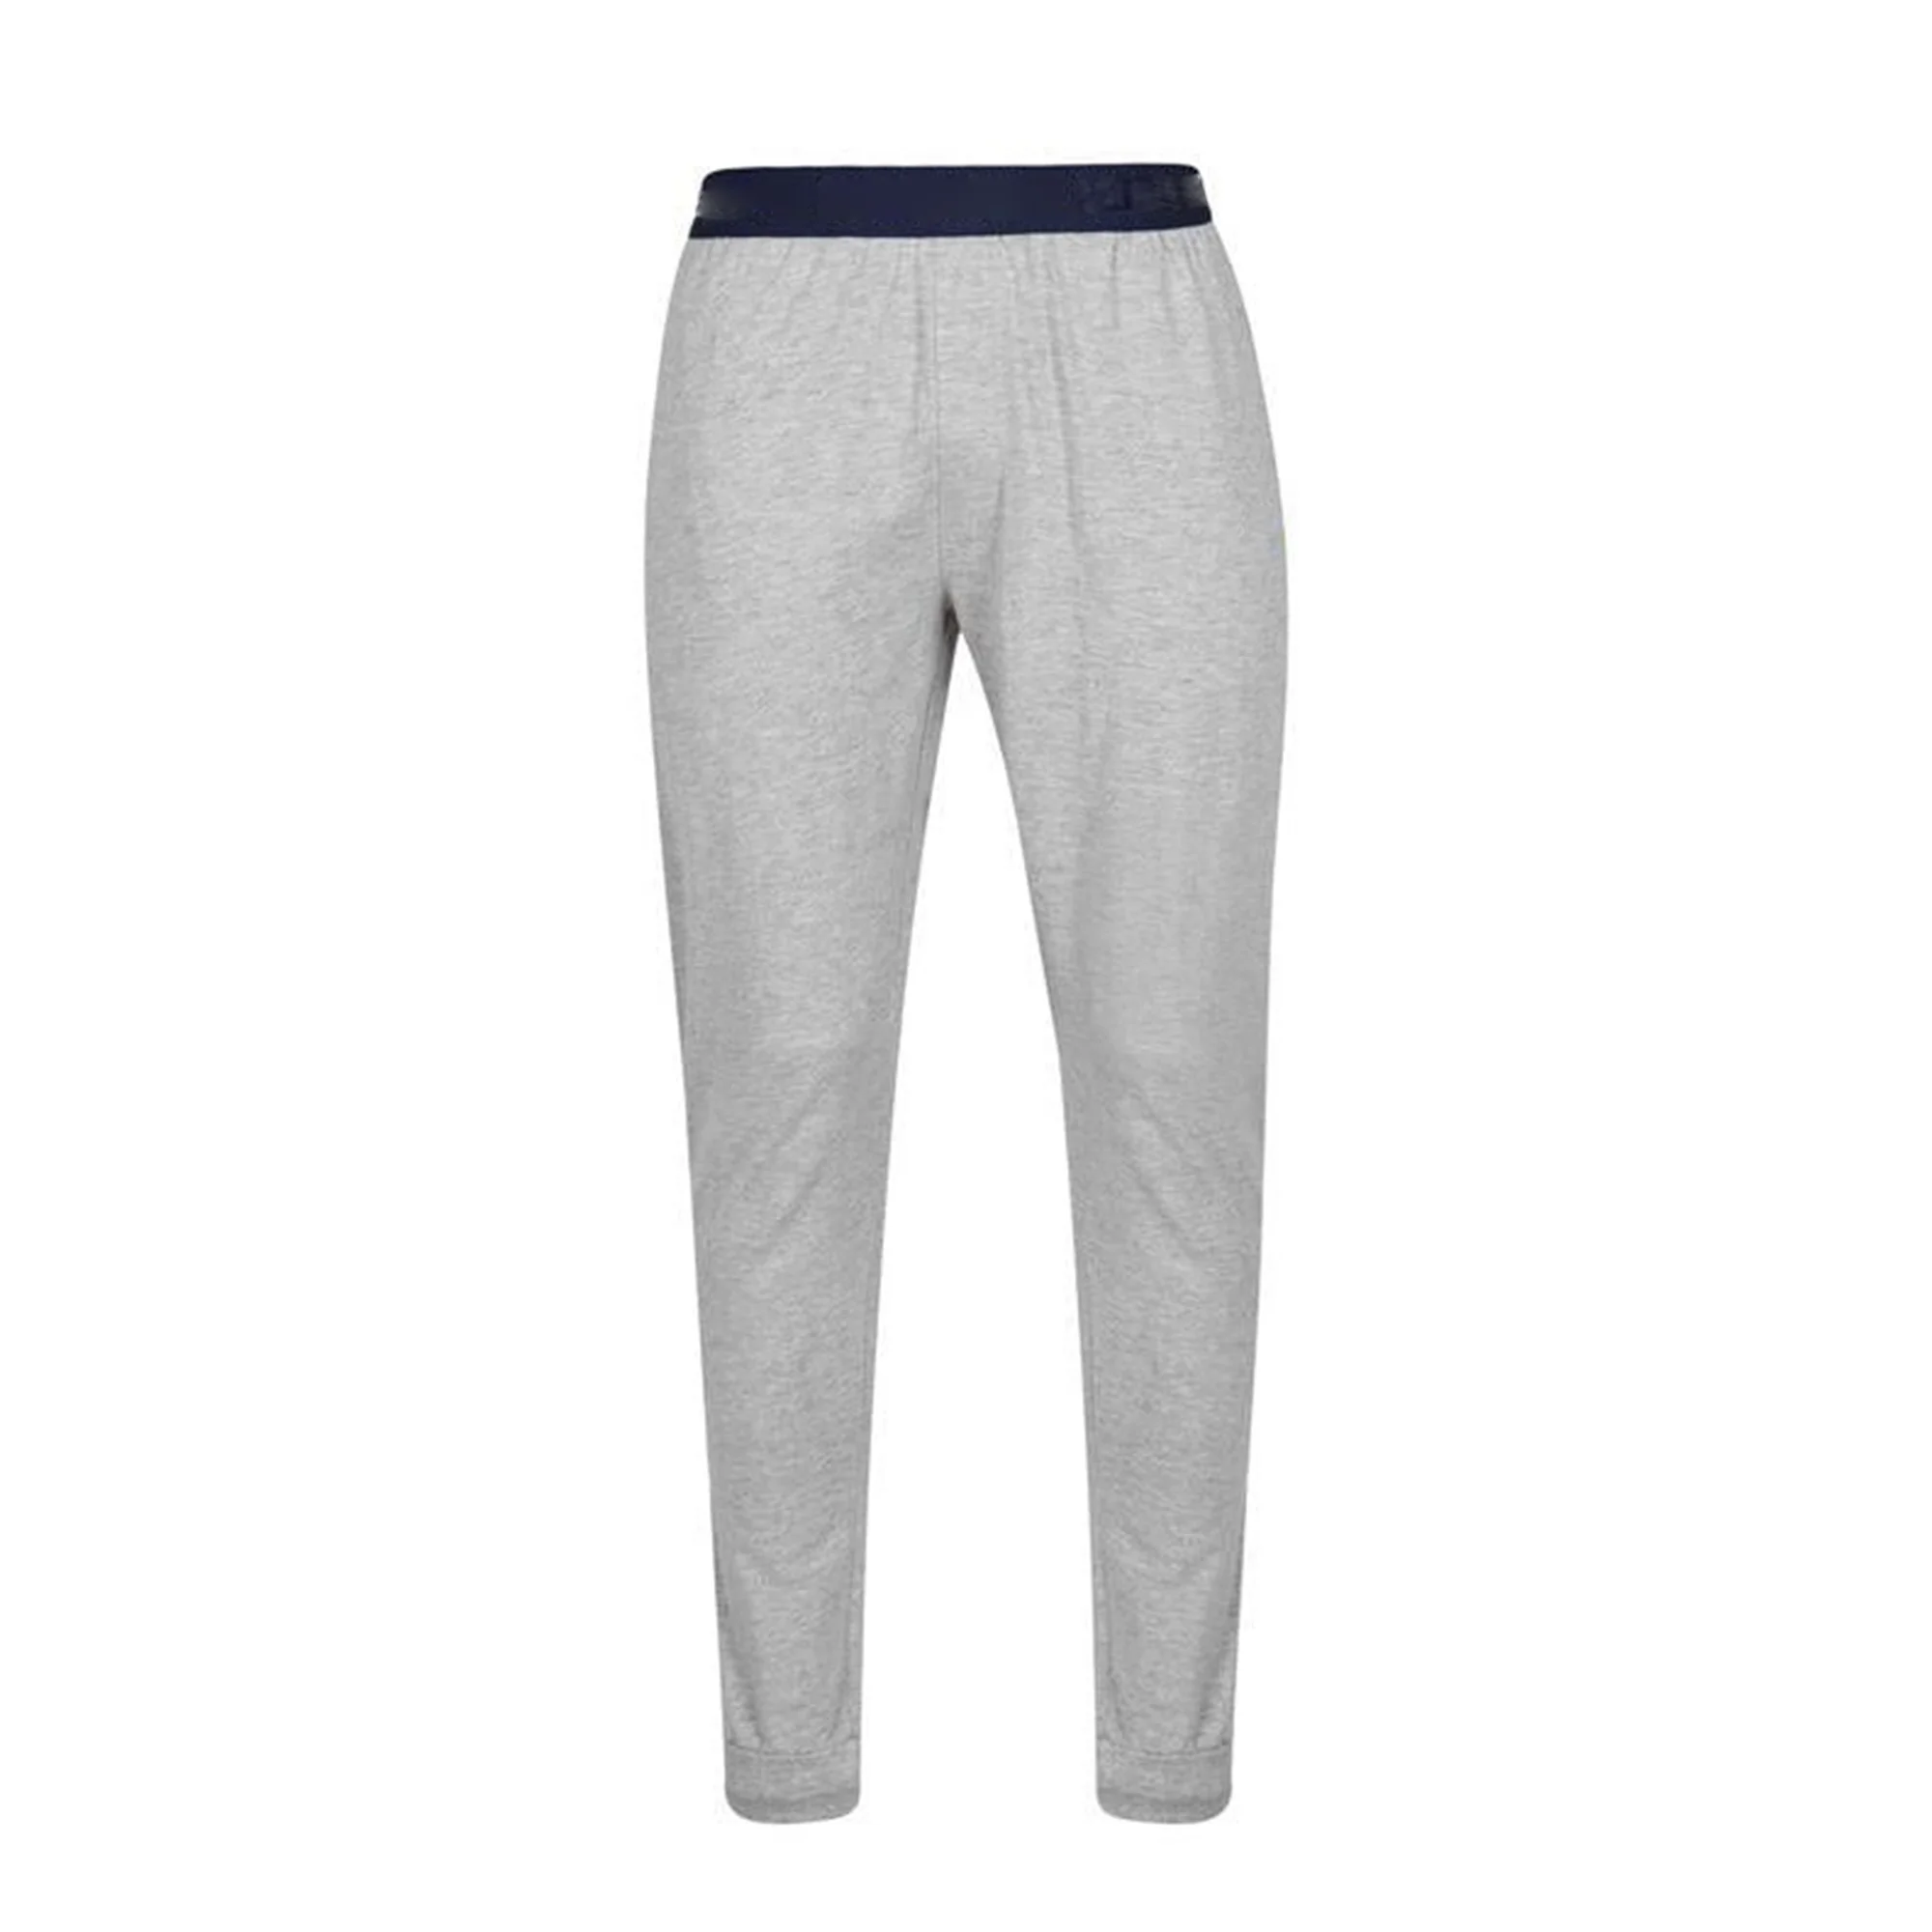 Best Workout Trousers for mens 2023  Trex